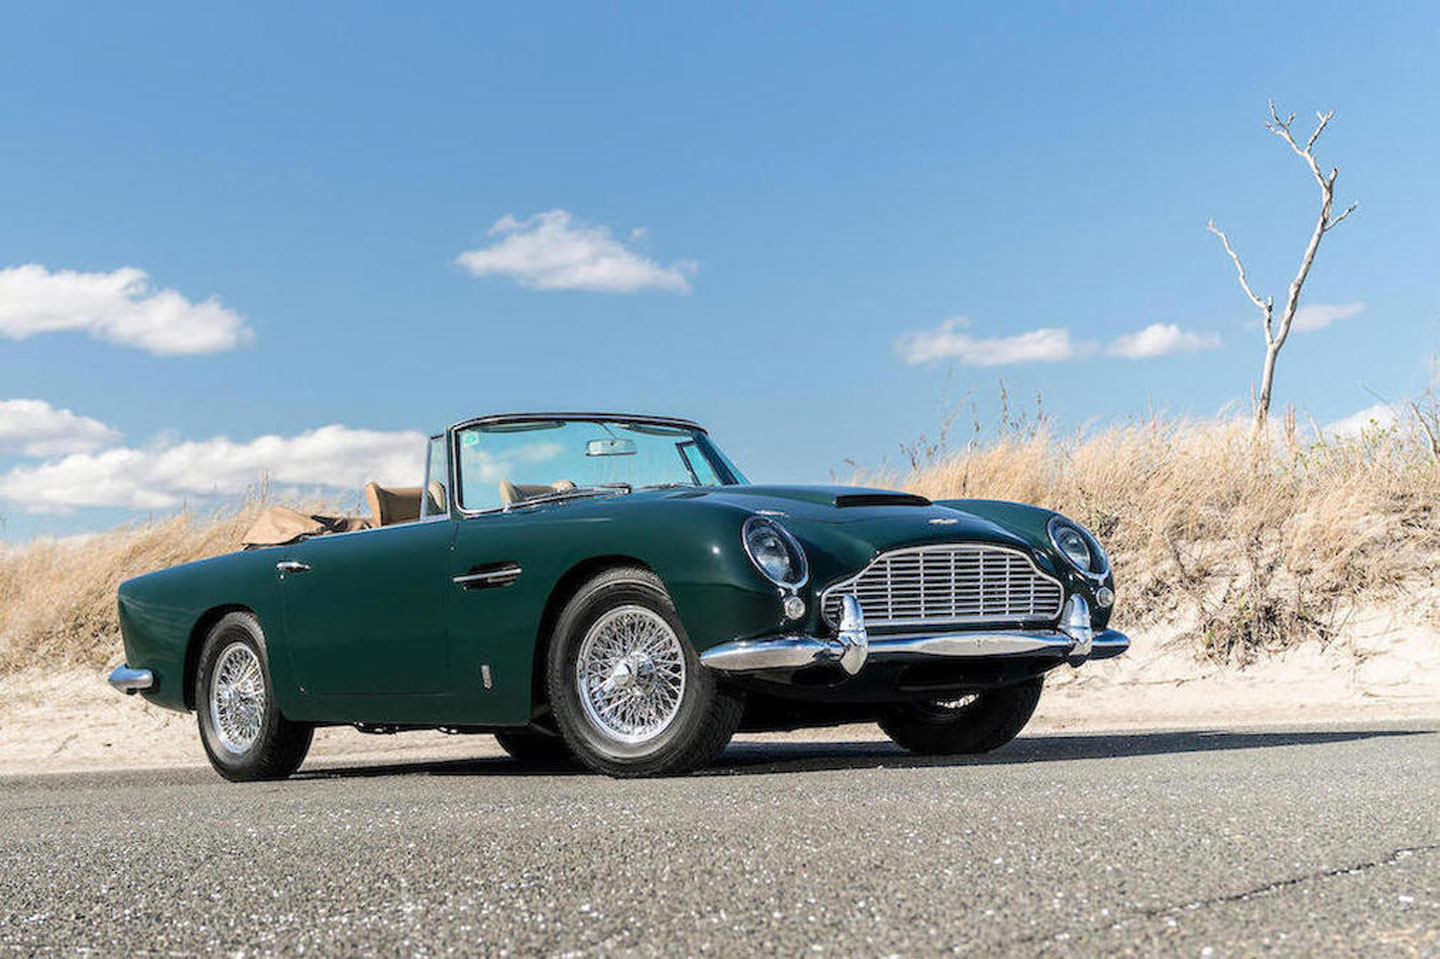 5 Cars For Everyone At This Week's Bonhams Sale In Connecticut